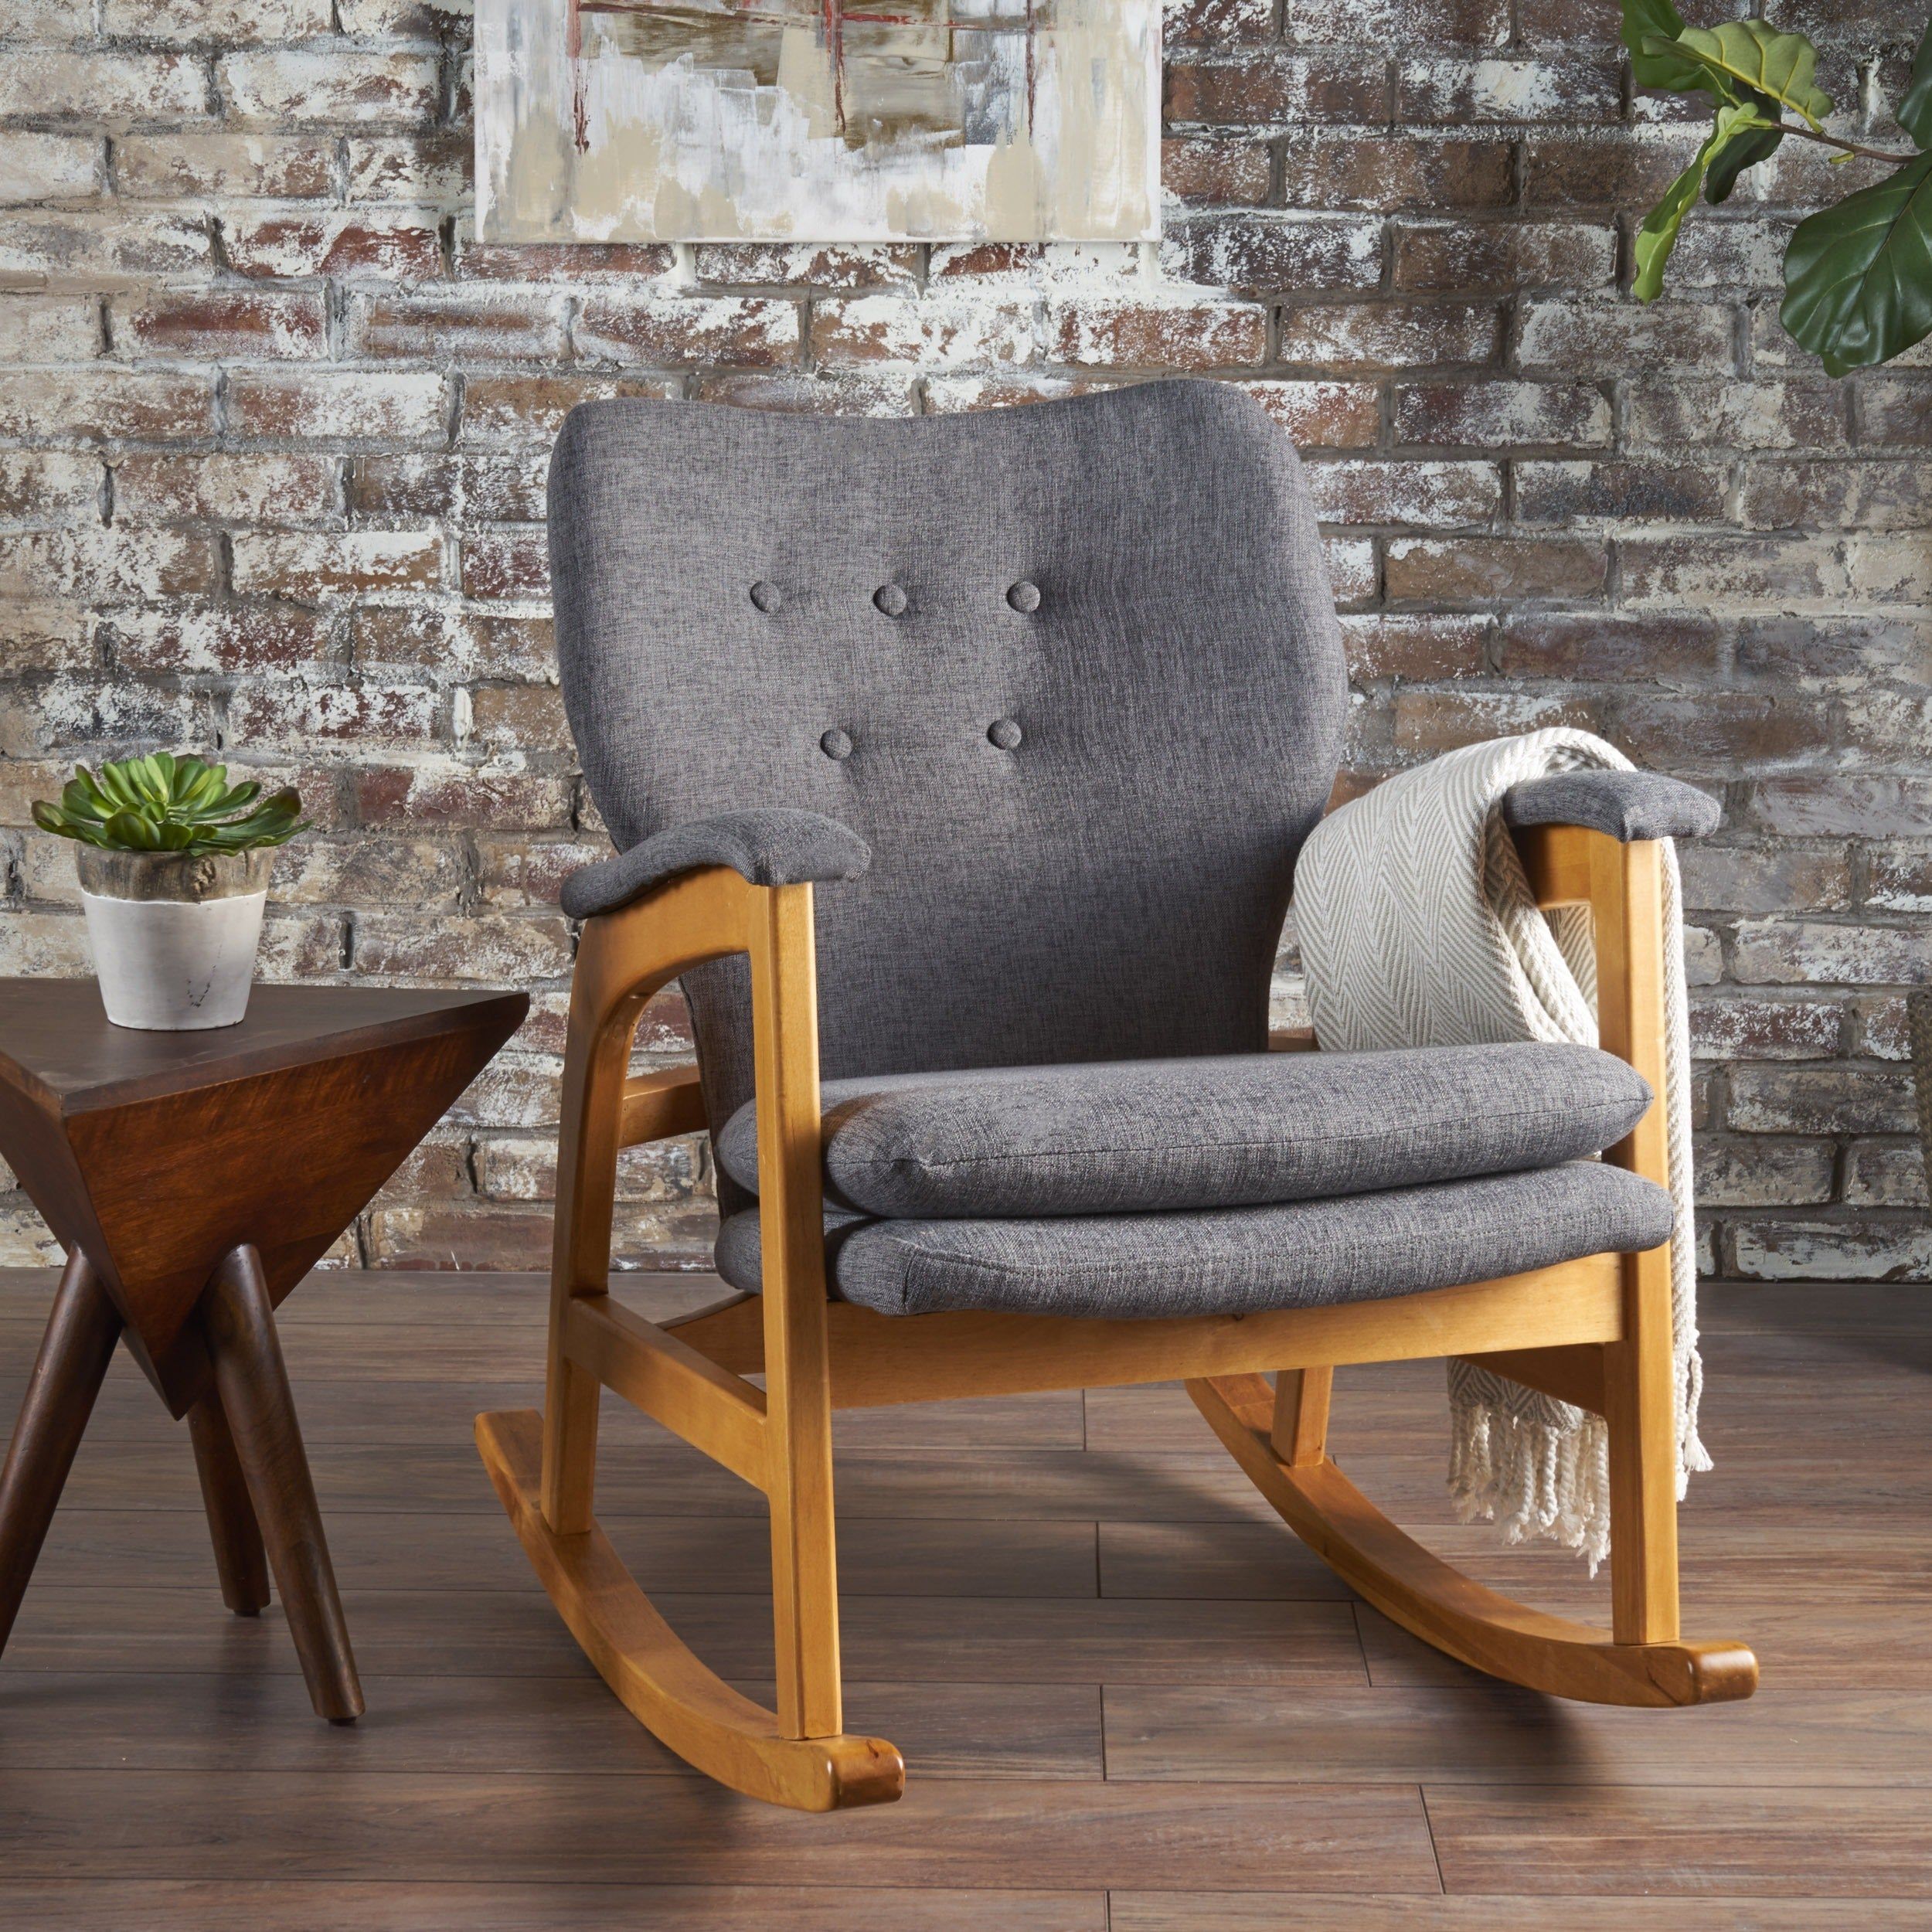 Rocking Chairs, Fabric Living Room Chairs | Shop Online At Inside Judson Traditional Rocking Chairs (View 11 of 20)